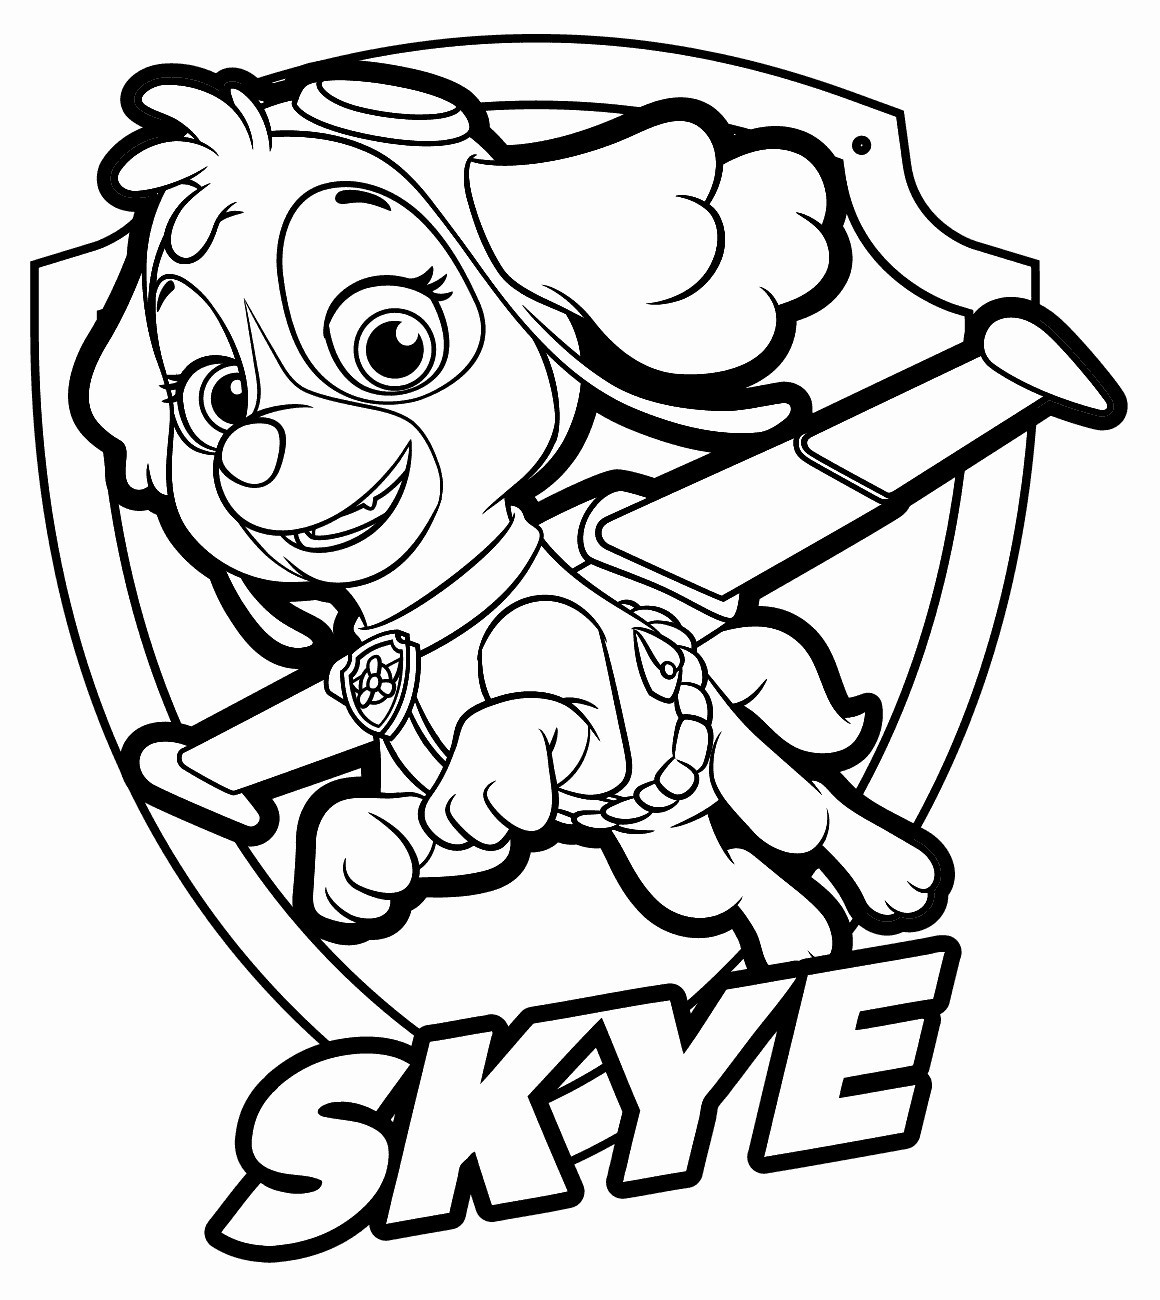 Free Printable Paw Patrol Coloring Pages Luxury Sky Entrancing 18 - Free Printable Paw Patrol Coloring Pages